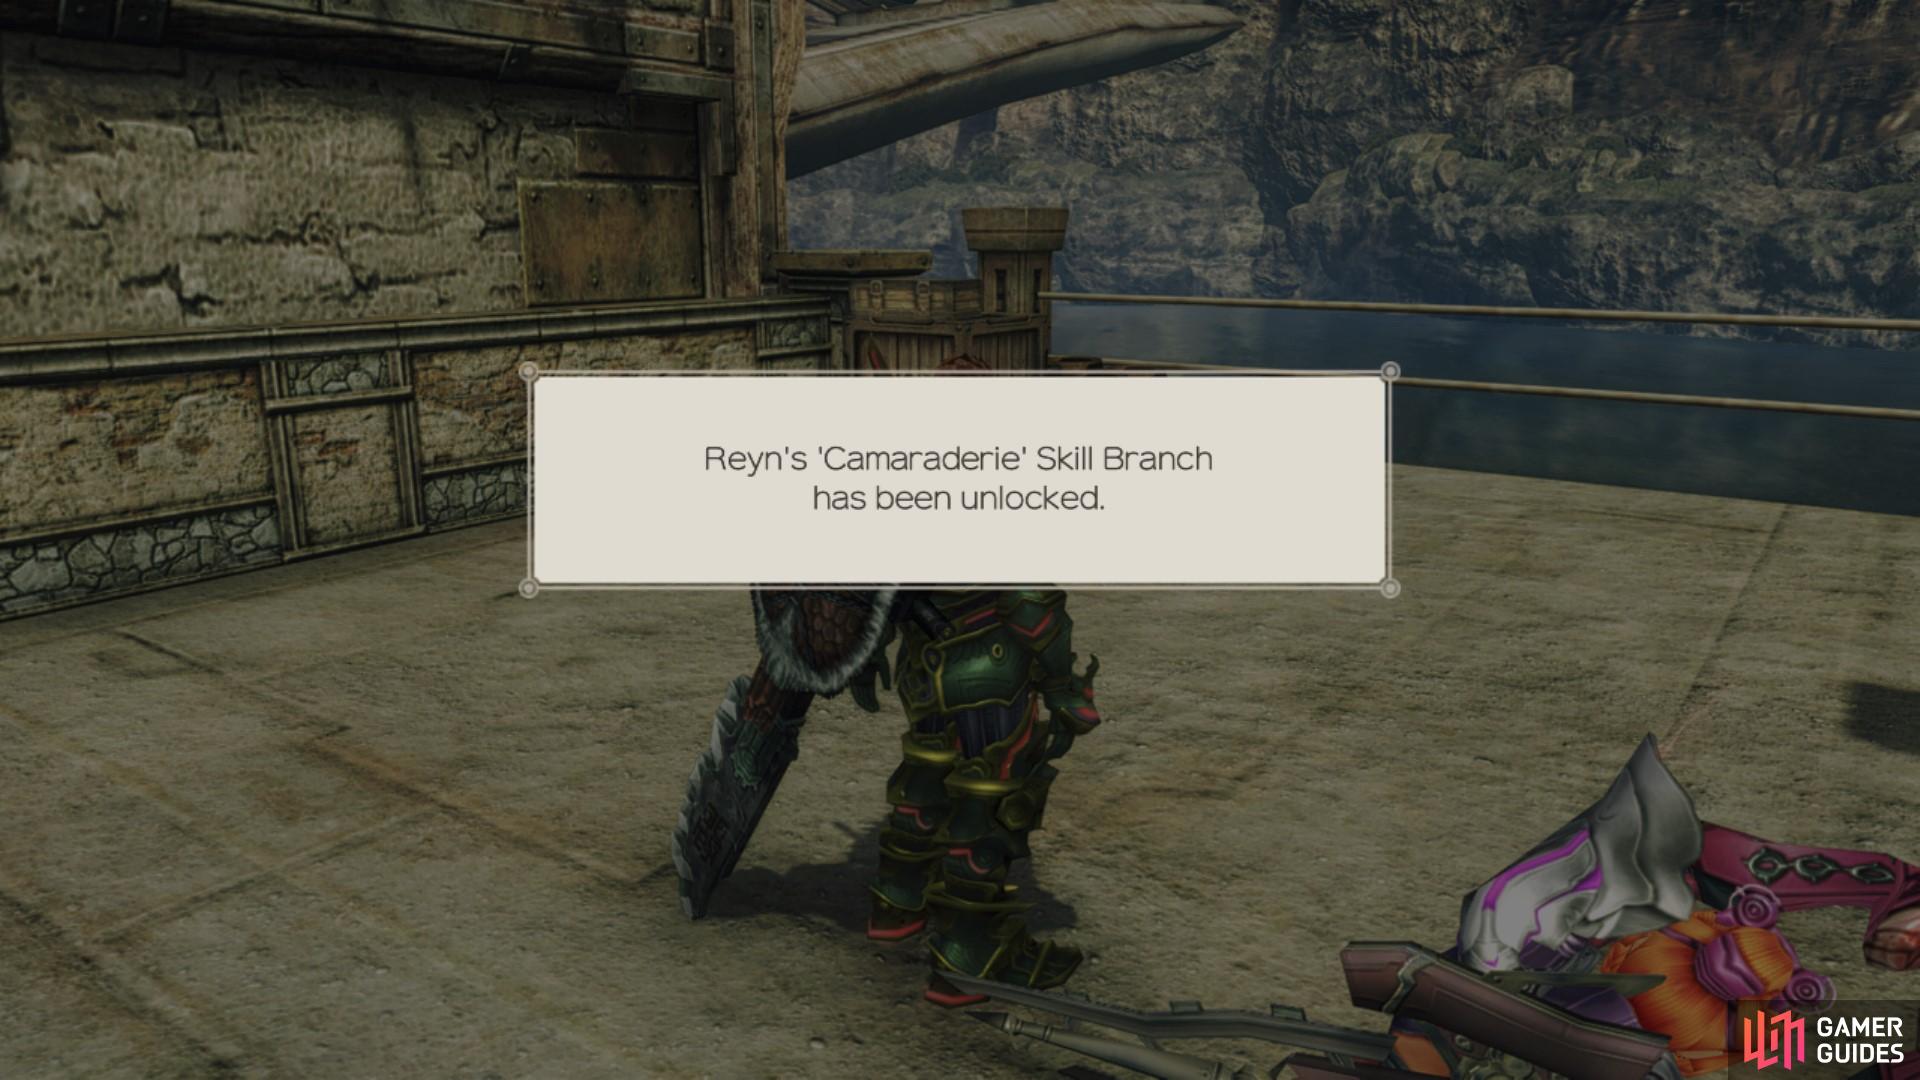 Completing this quest will unlock Reyn’s fifth skill branch, Camaraderie.